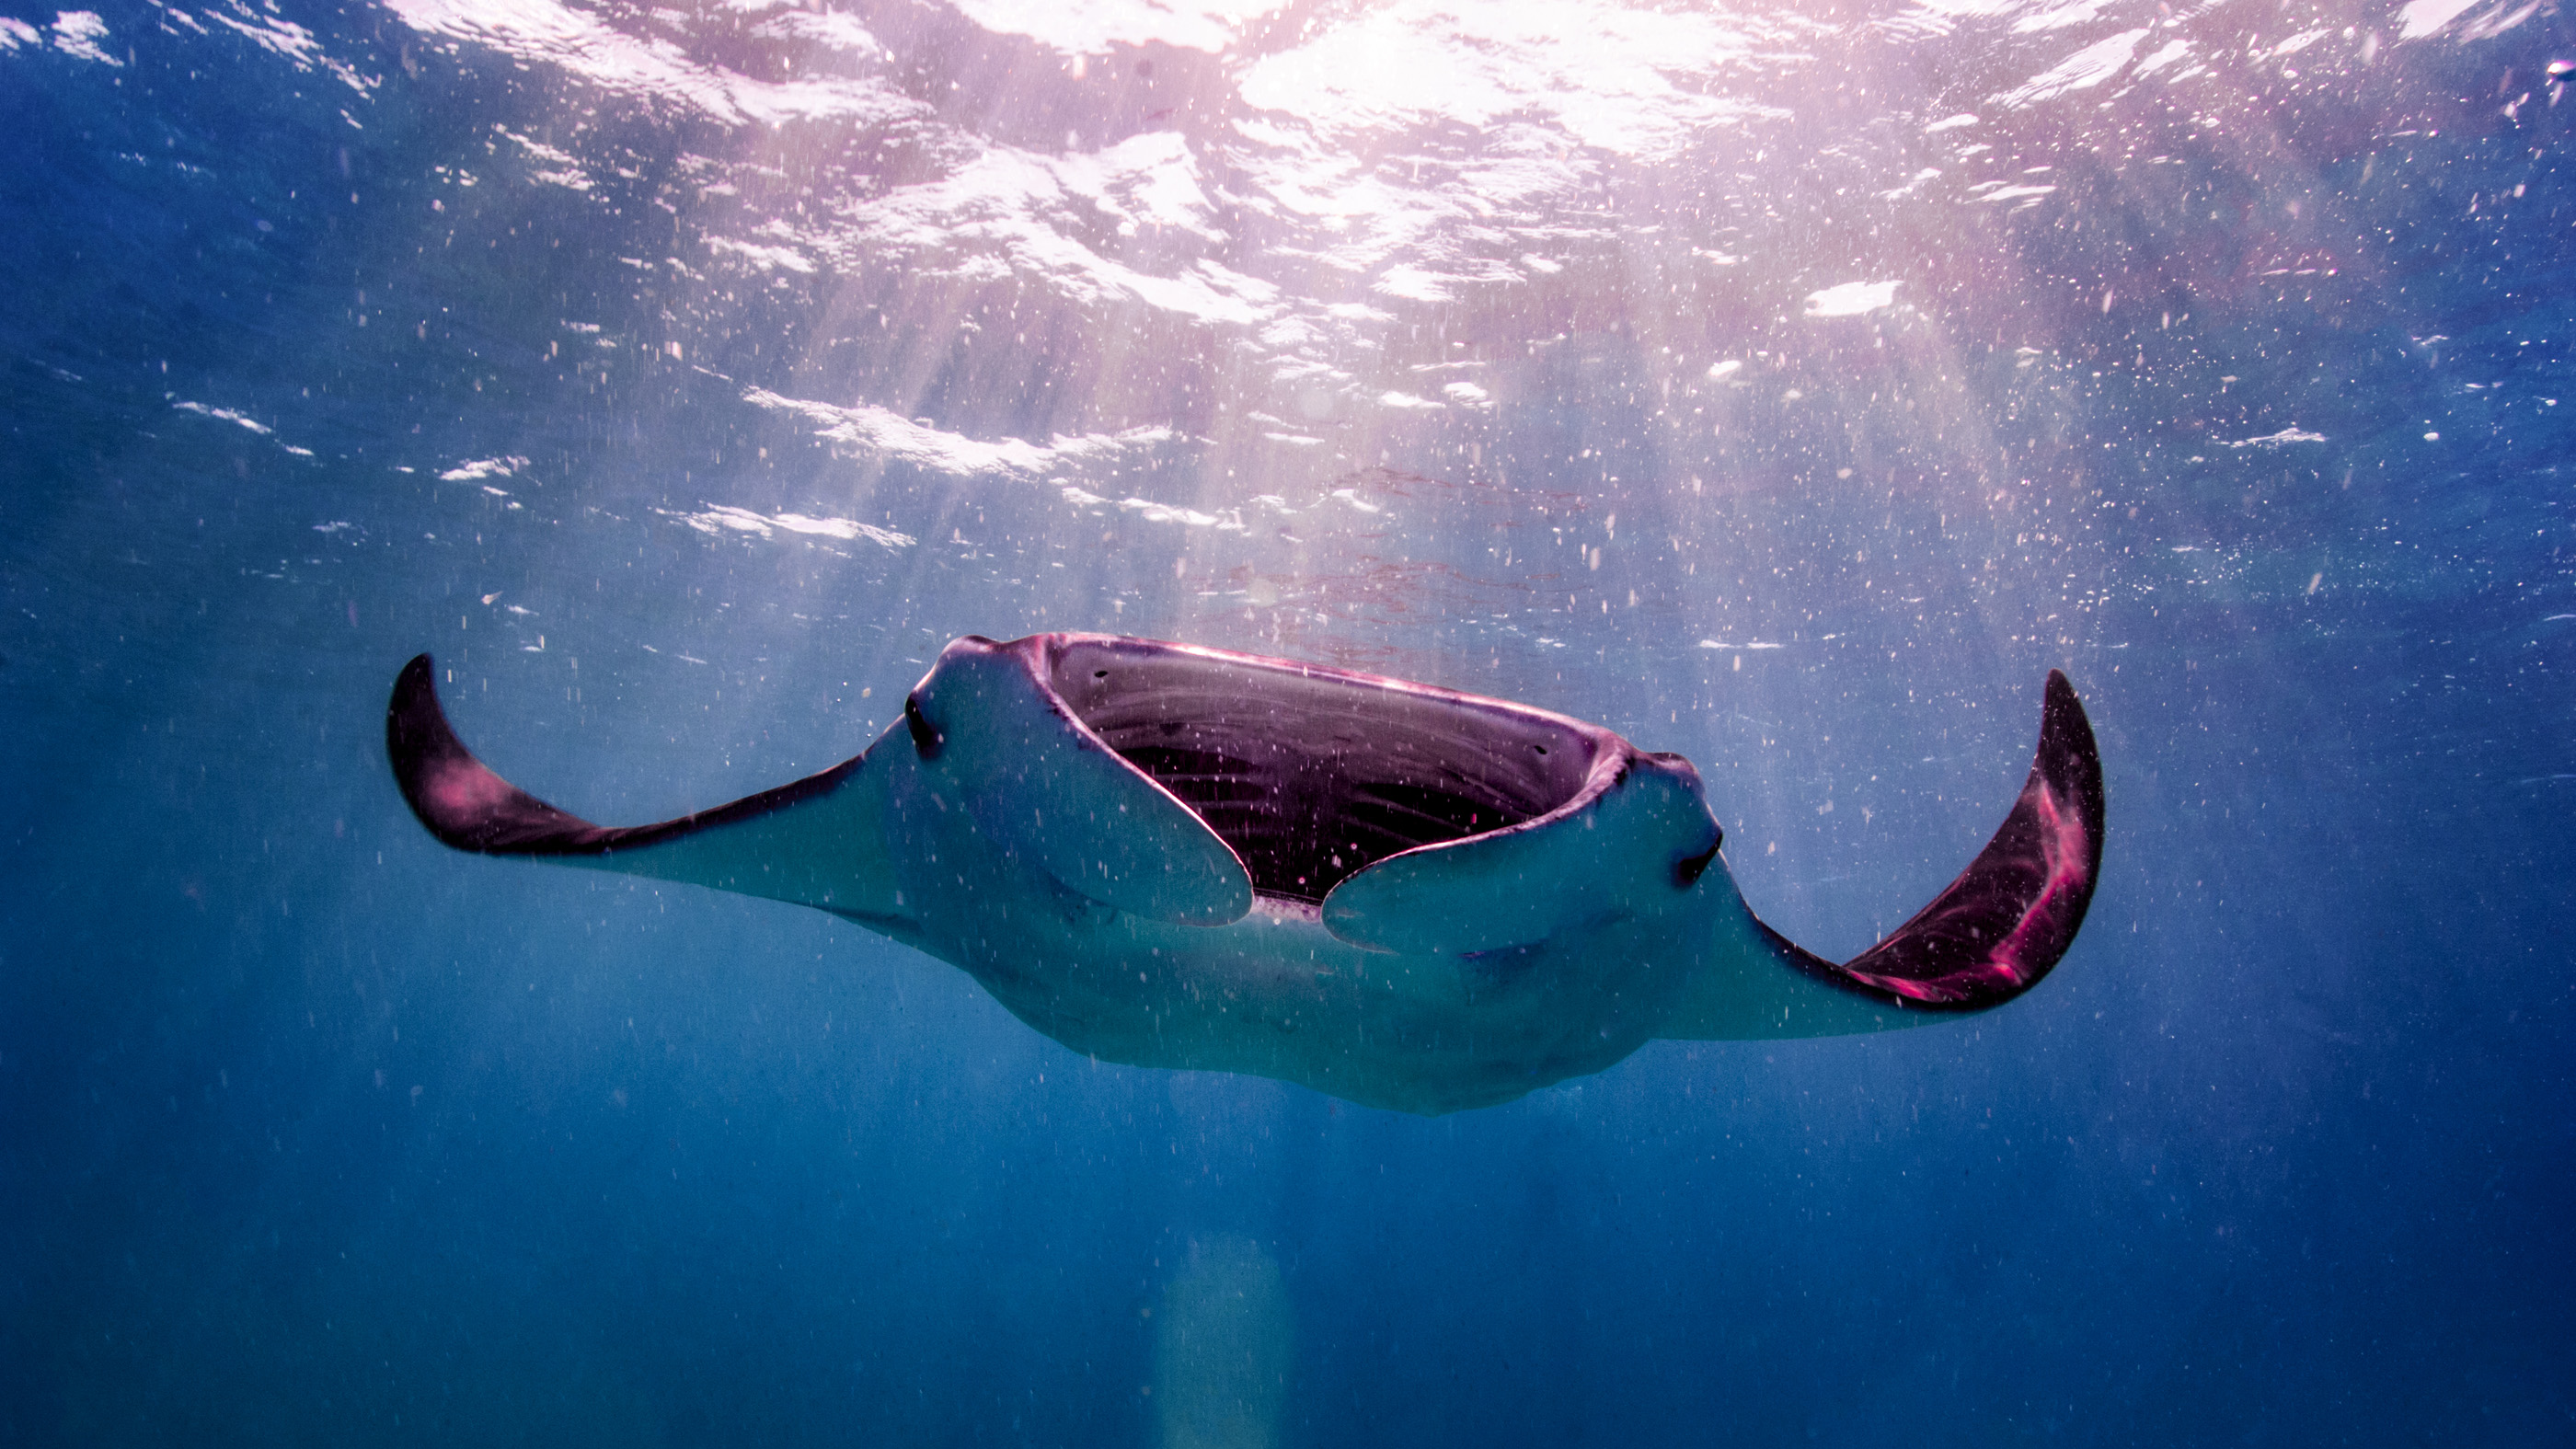 Rare pink manta ray caught courting lady friend Down Under